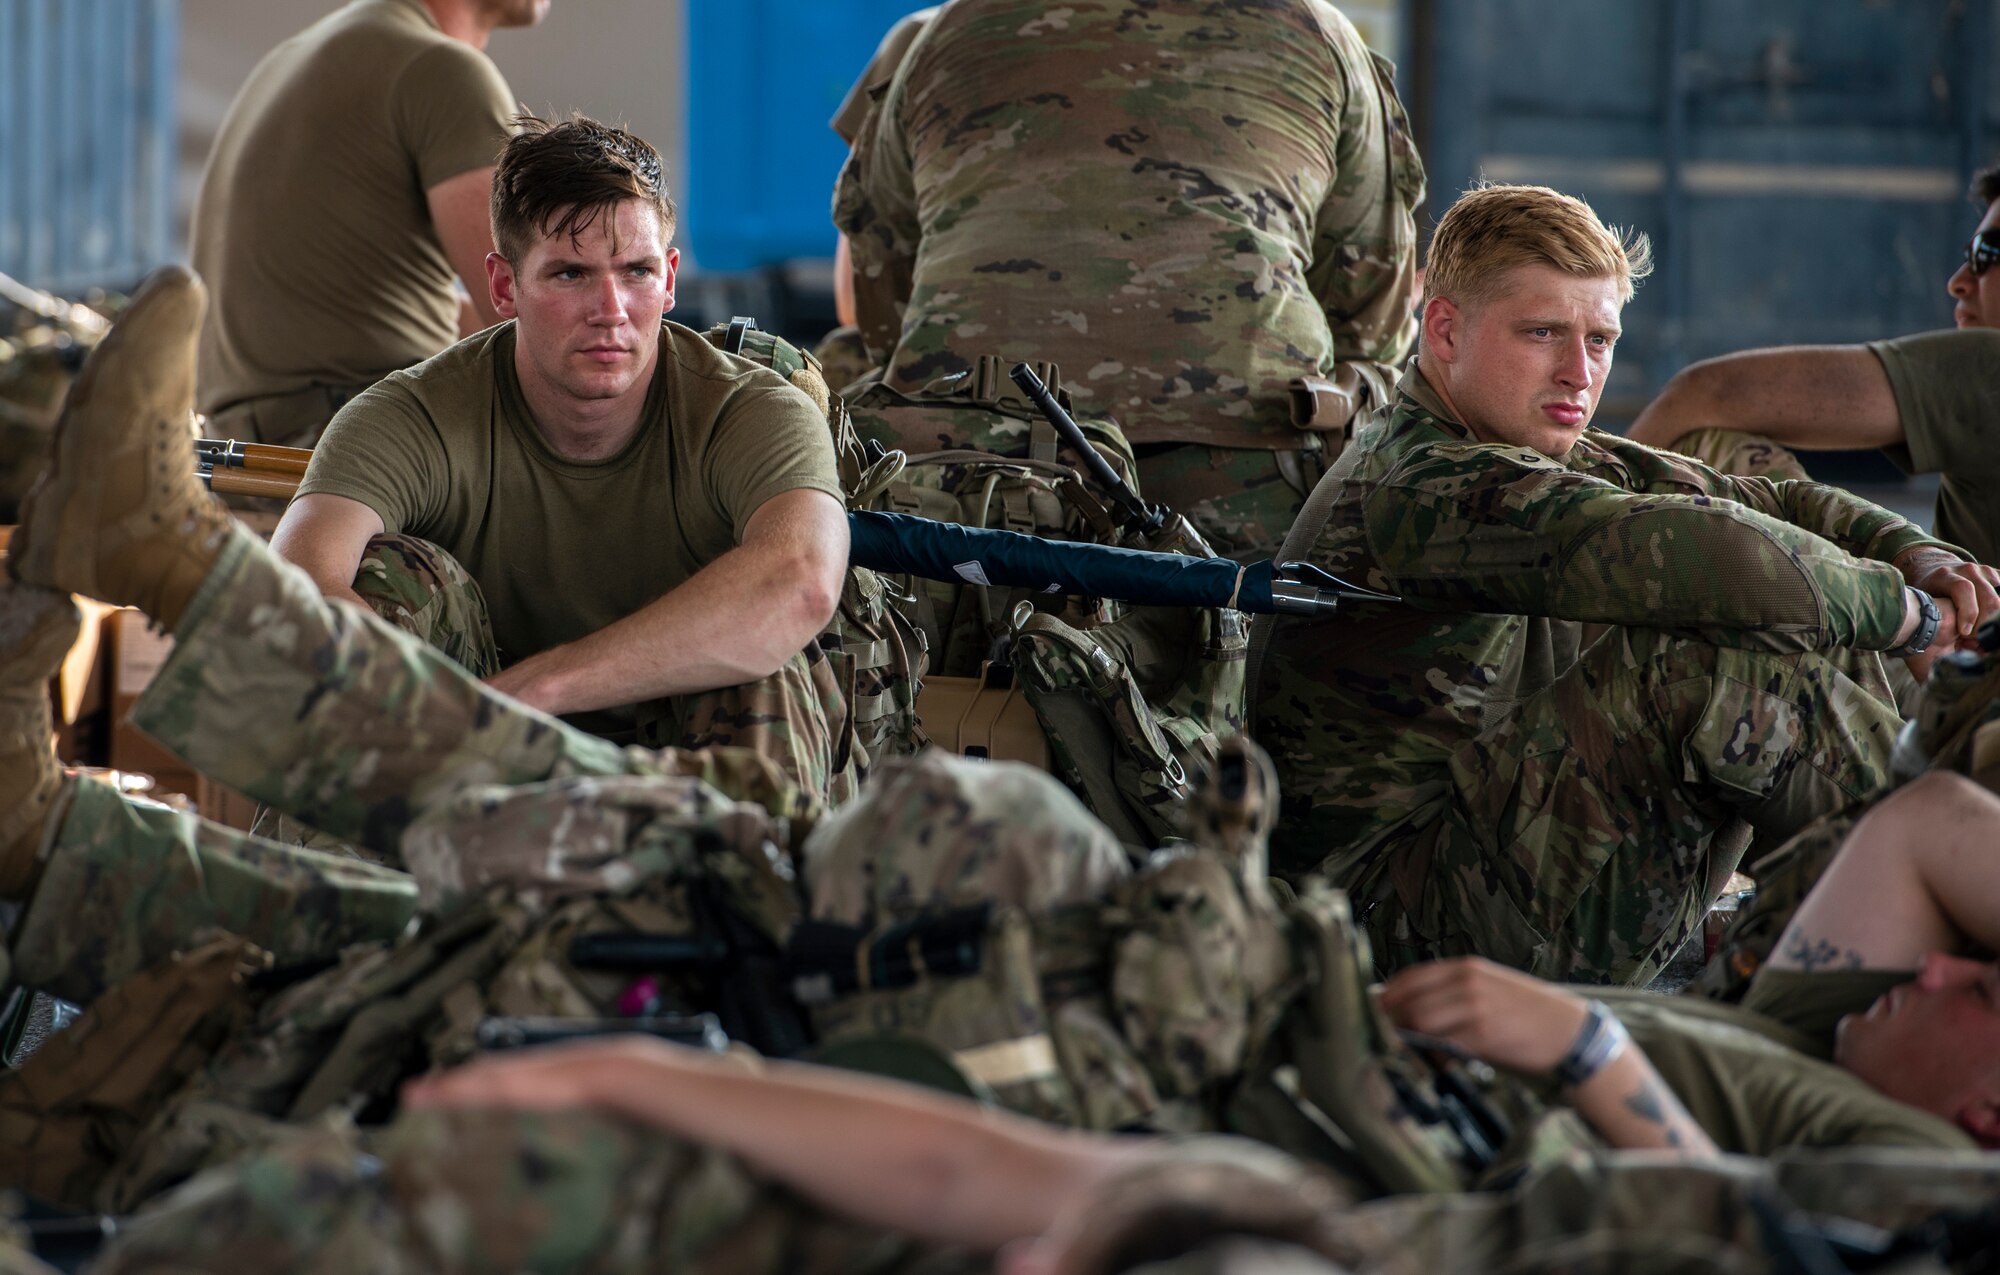 Service members rest and wait at Personnel Support for Contingency Operations on their way to Afghanistan Aug. 18, 2021, at an undisclosed location in Southwest Asia.